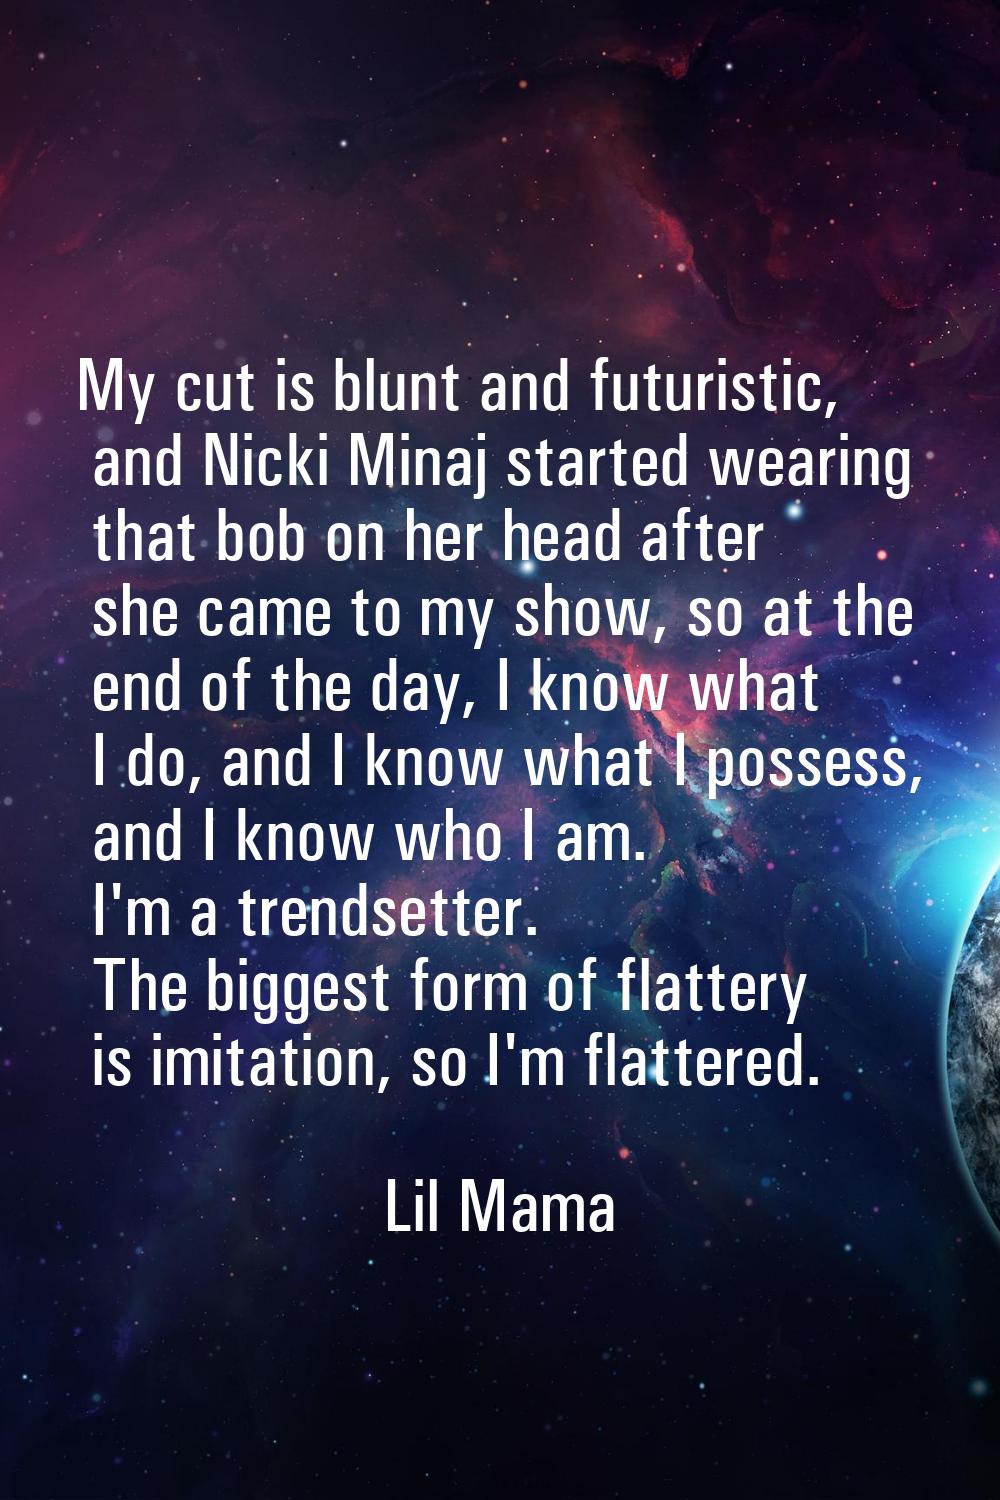 My cut is blunt and futuristic, and Nicki Minaj started wearing that bob on her head after she came